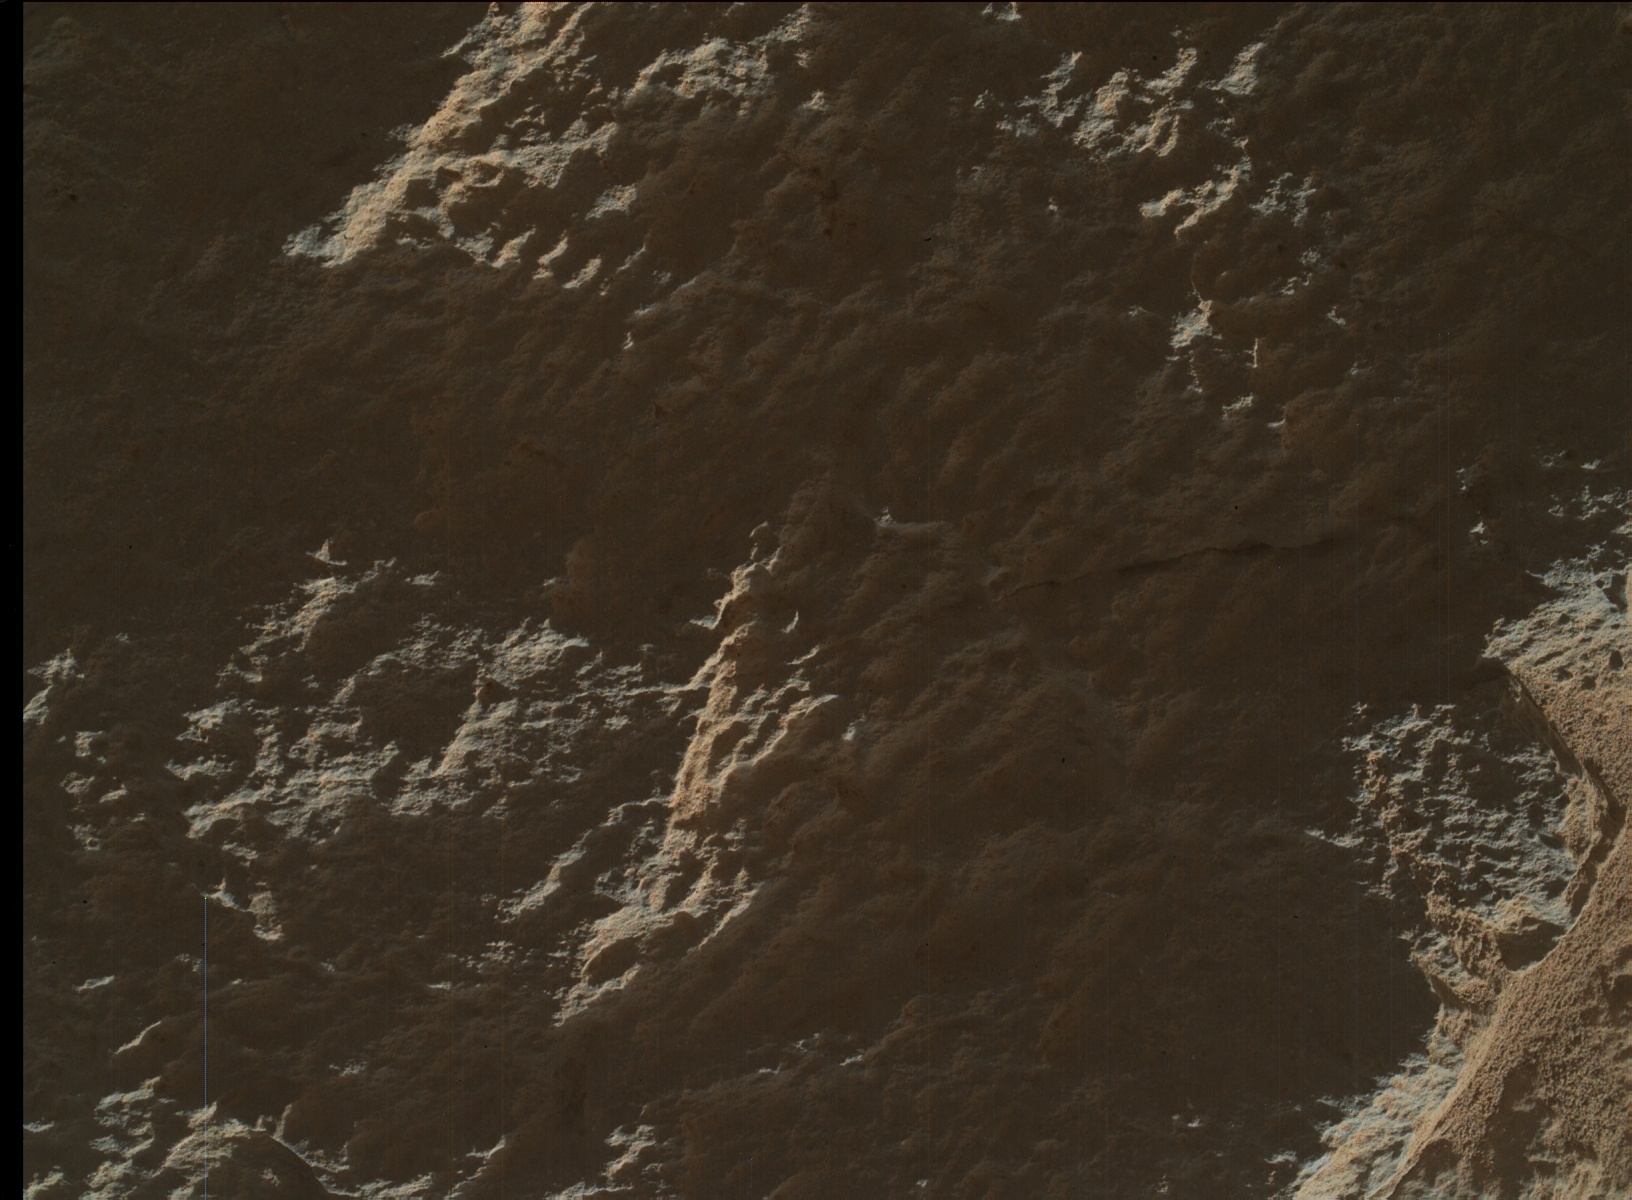 Nasa's Mars rover Curiosity acquired this image using its Mars Hand Lens Imager (MAHLI) on Sol 3315